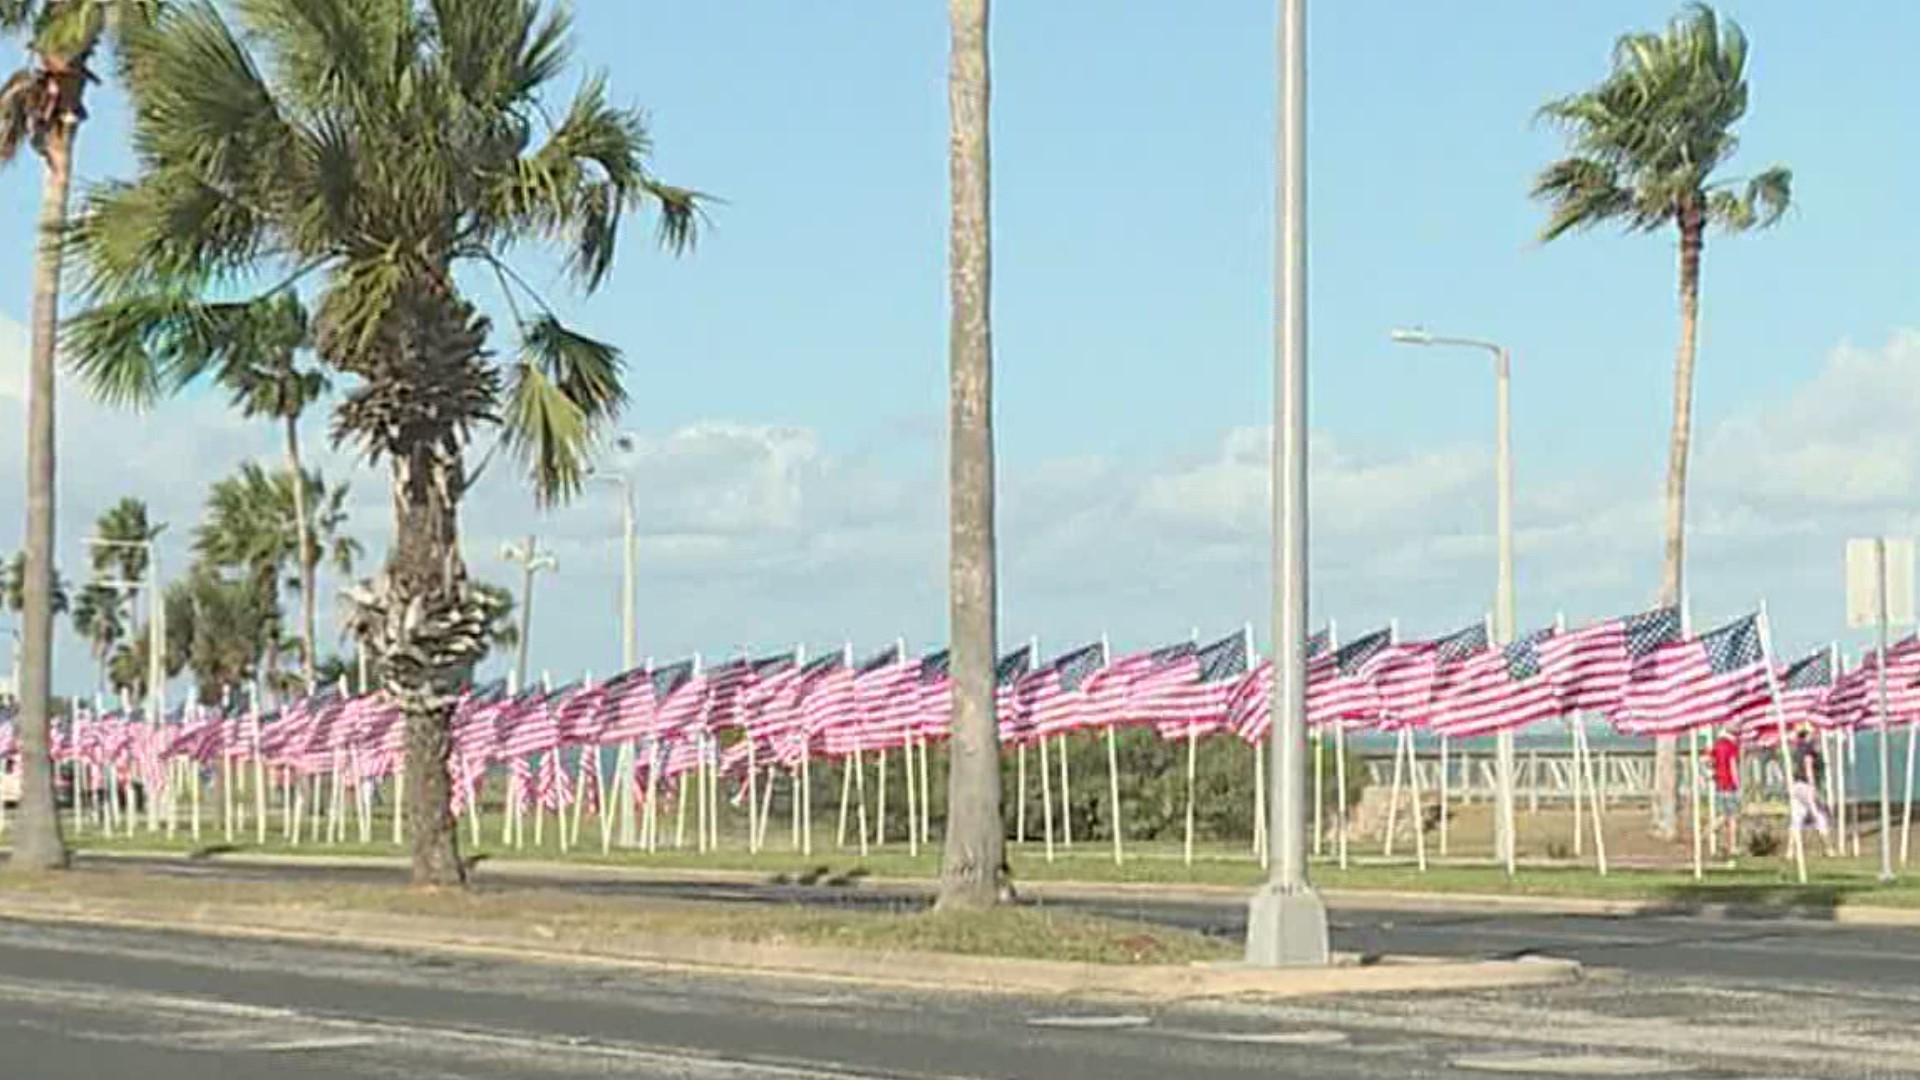 Flags for our Heroes” placed along Ocean Drive